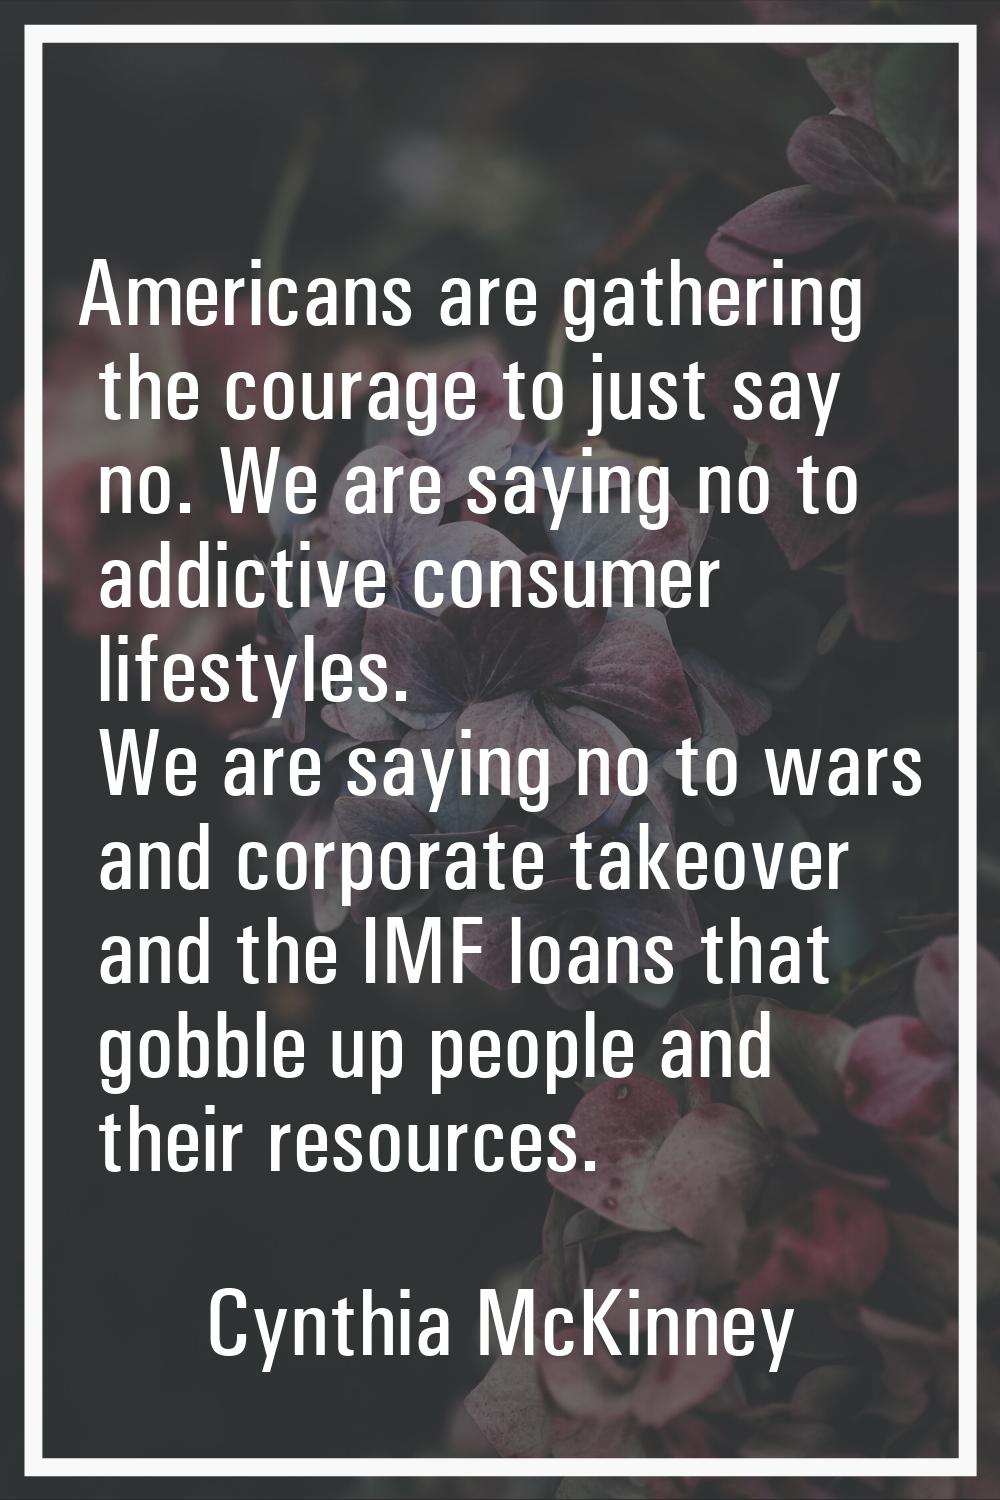 Americans are gathering the courage to just say no. We are saying no to addictive consumer lifestyl